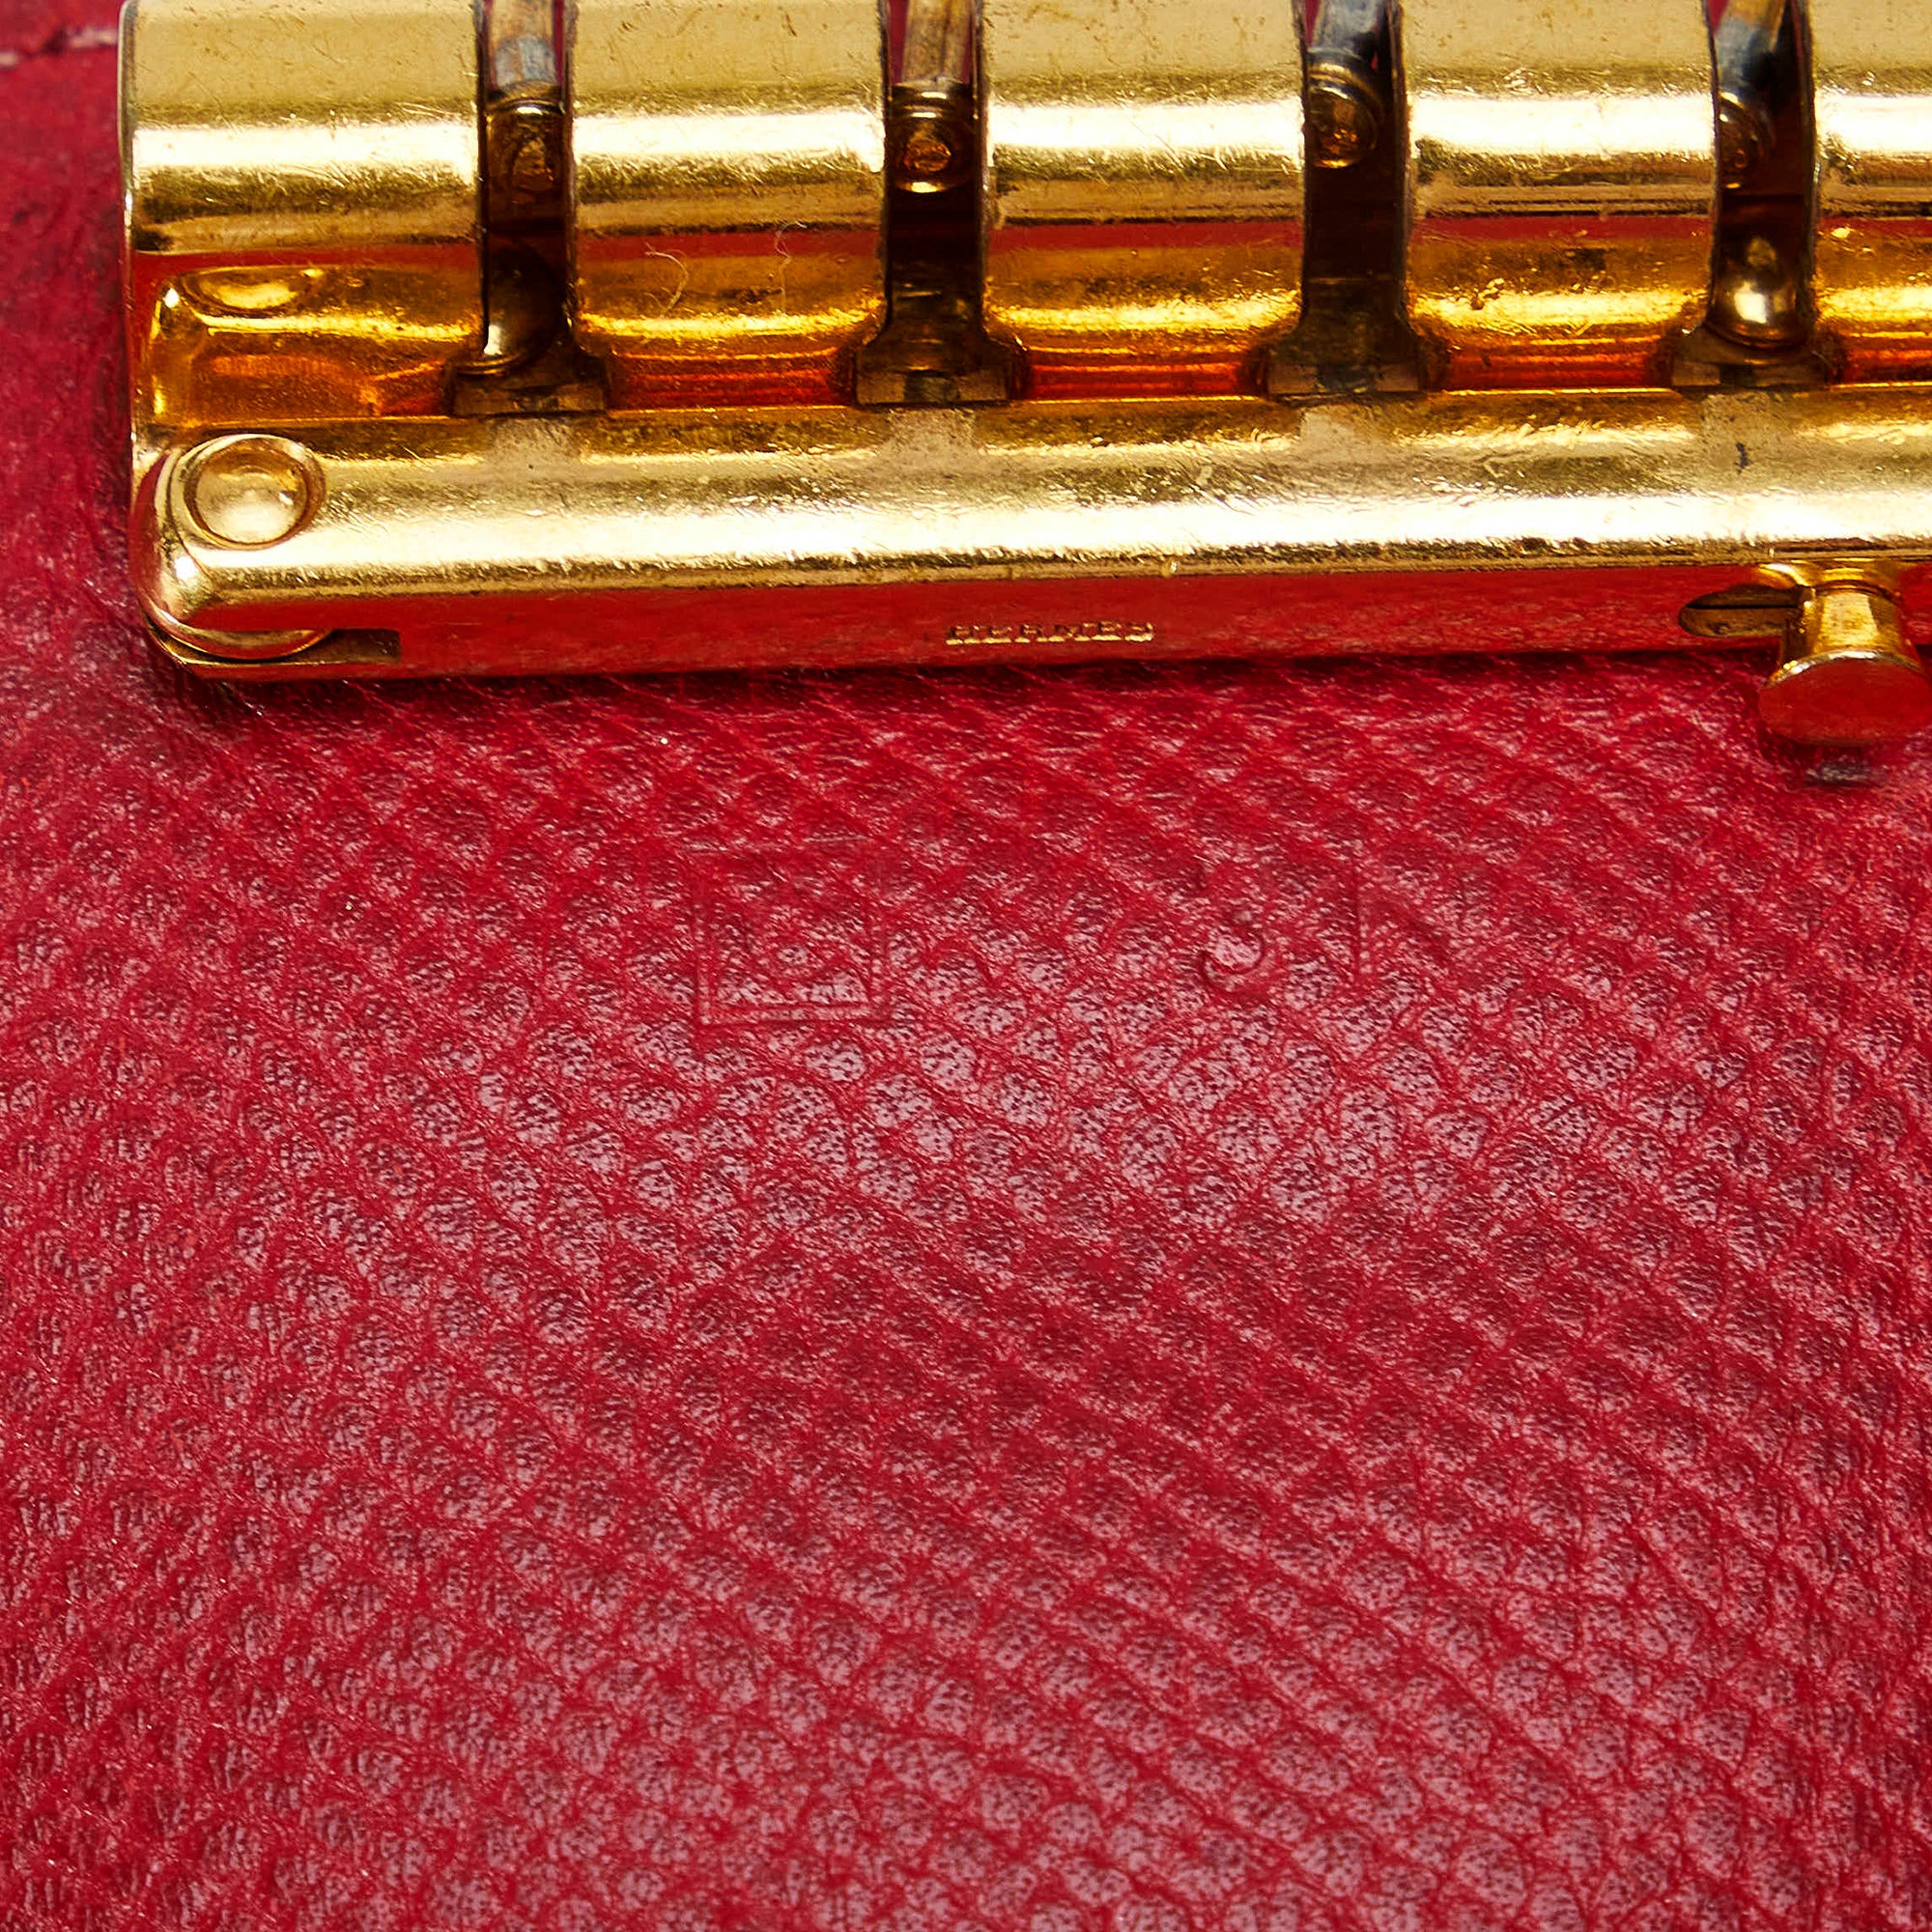 Red Hermes Leather Key Holder  hermes 1969 pre owned piano